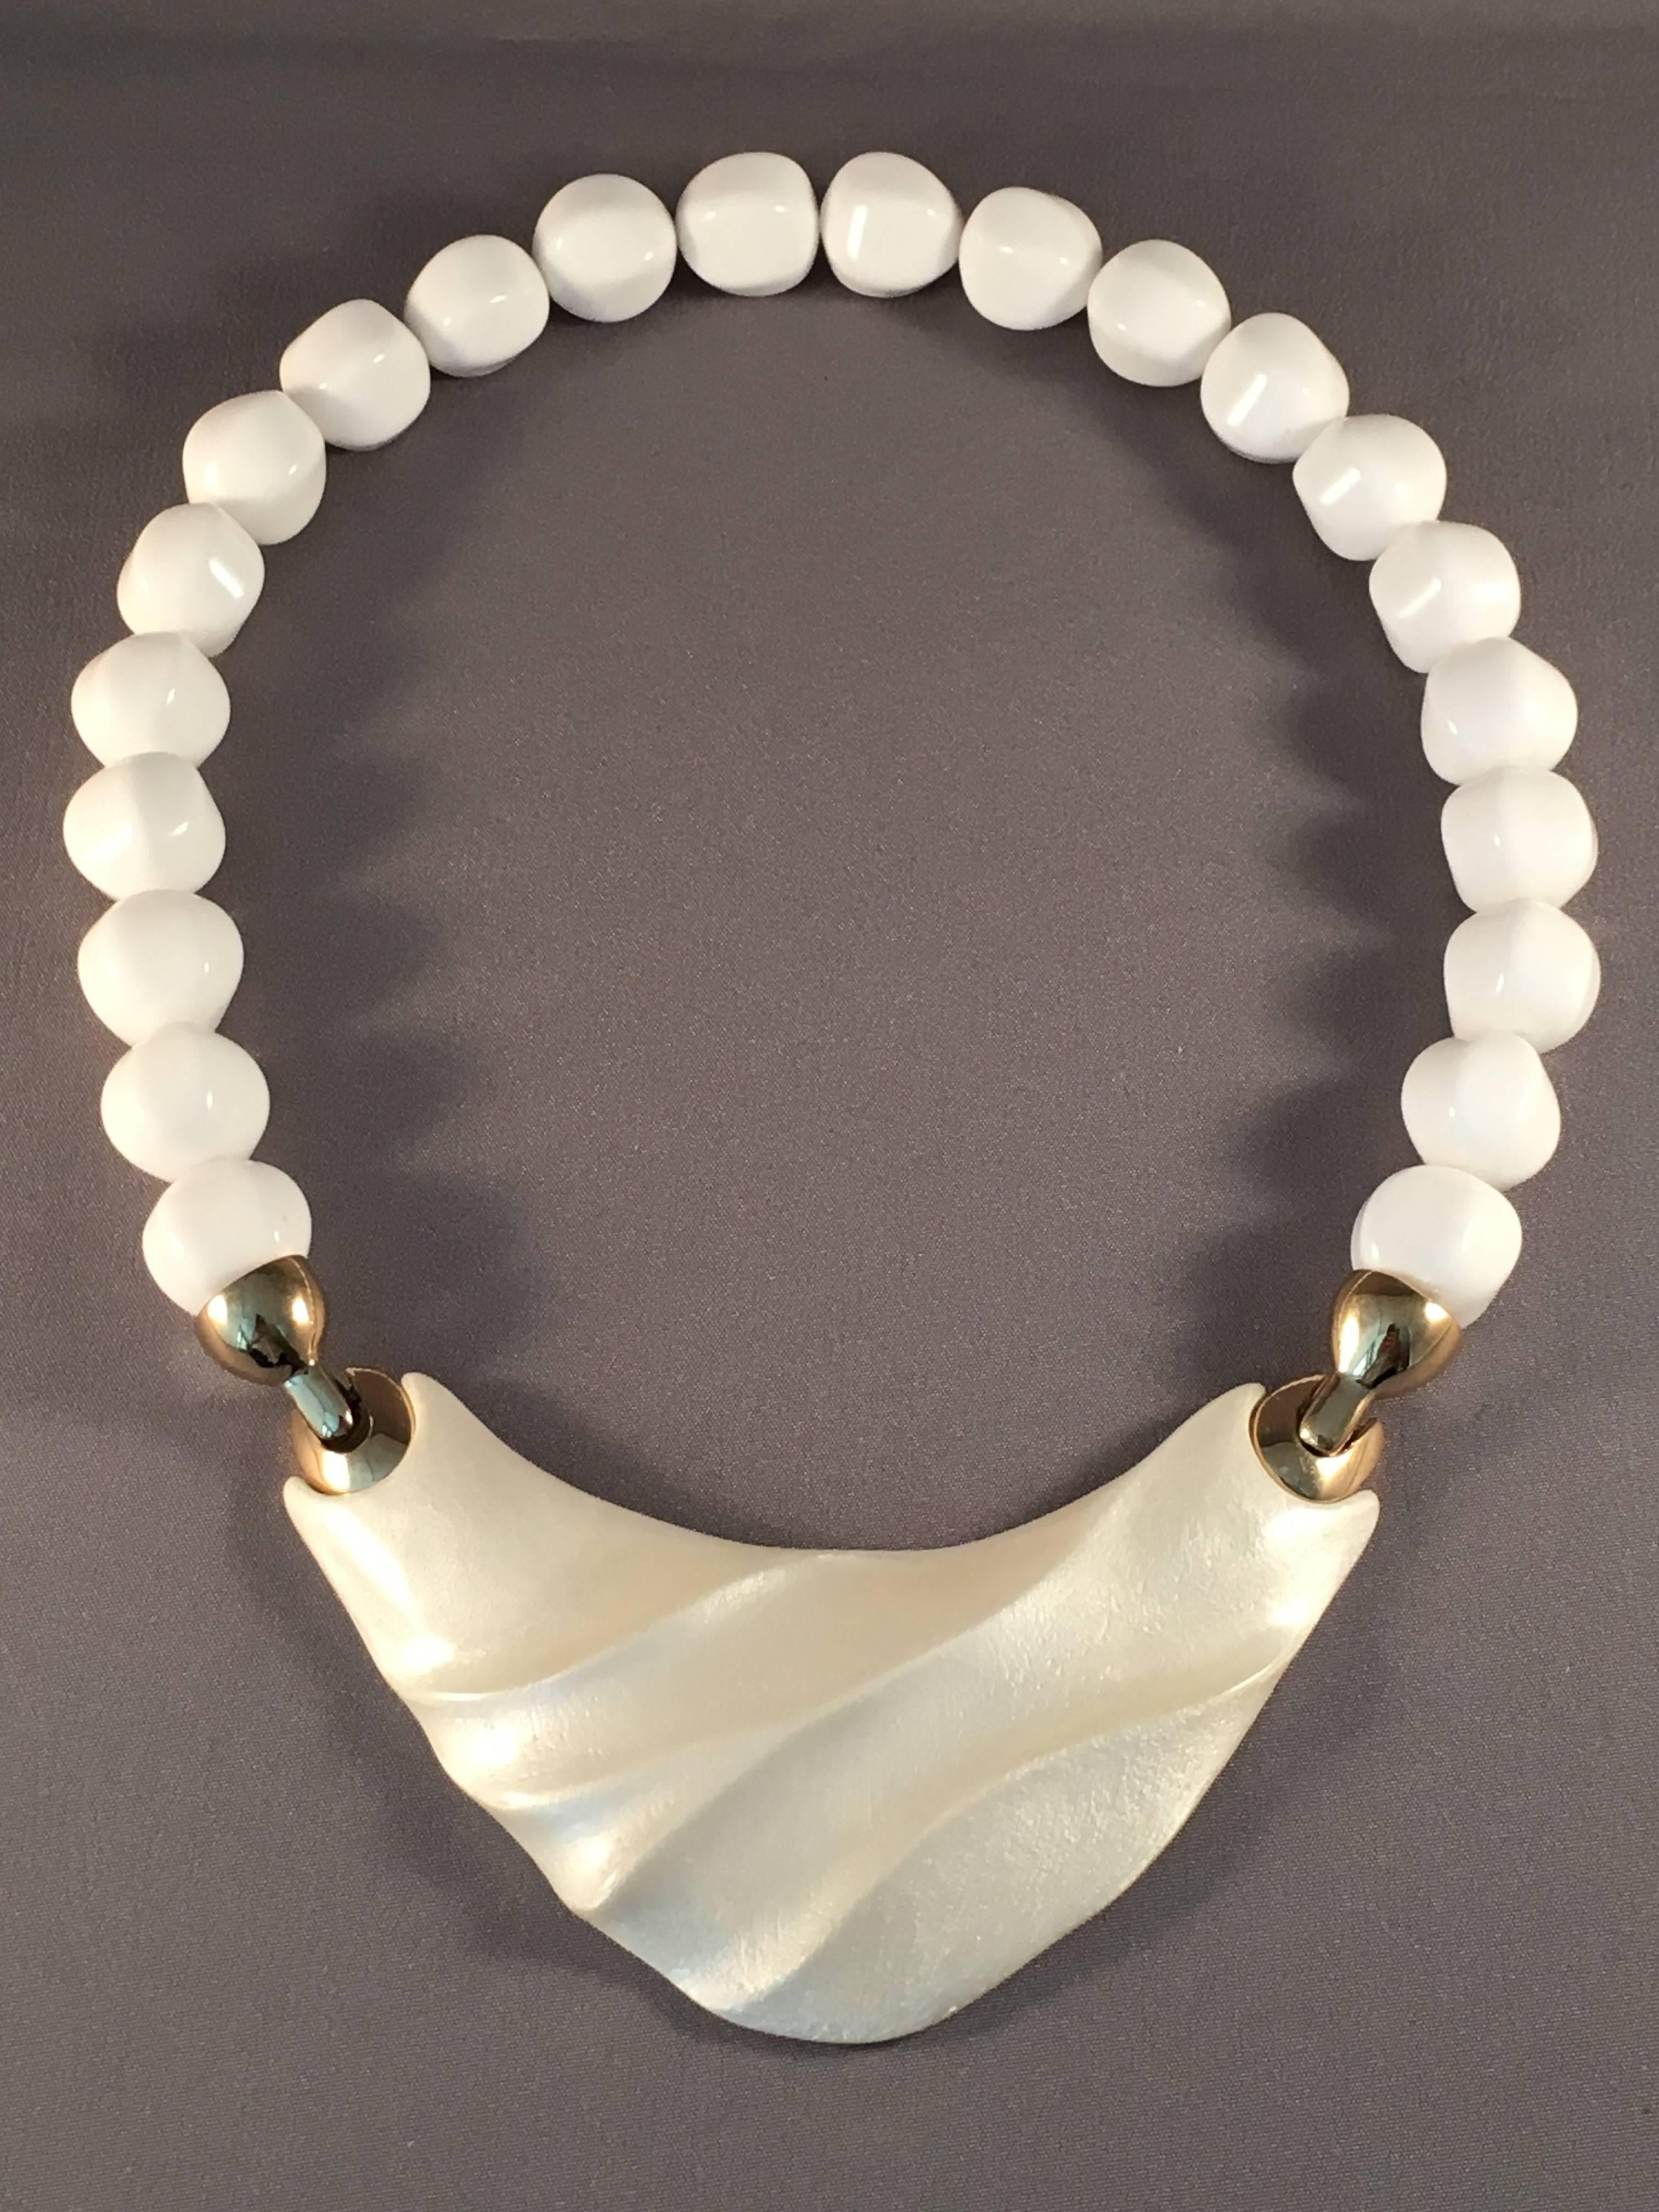 White Modernist necklace designed by Kunio Matusmoto for Trifari. Matsumoto was a Japanese architect who designed jewelry for Trifari in the late 1970s. His pieces have a very sculptural quality to them. The necklace measures 18". It is made of